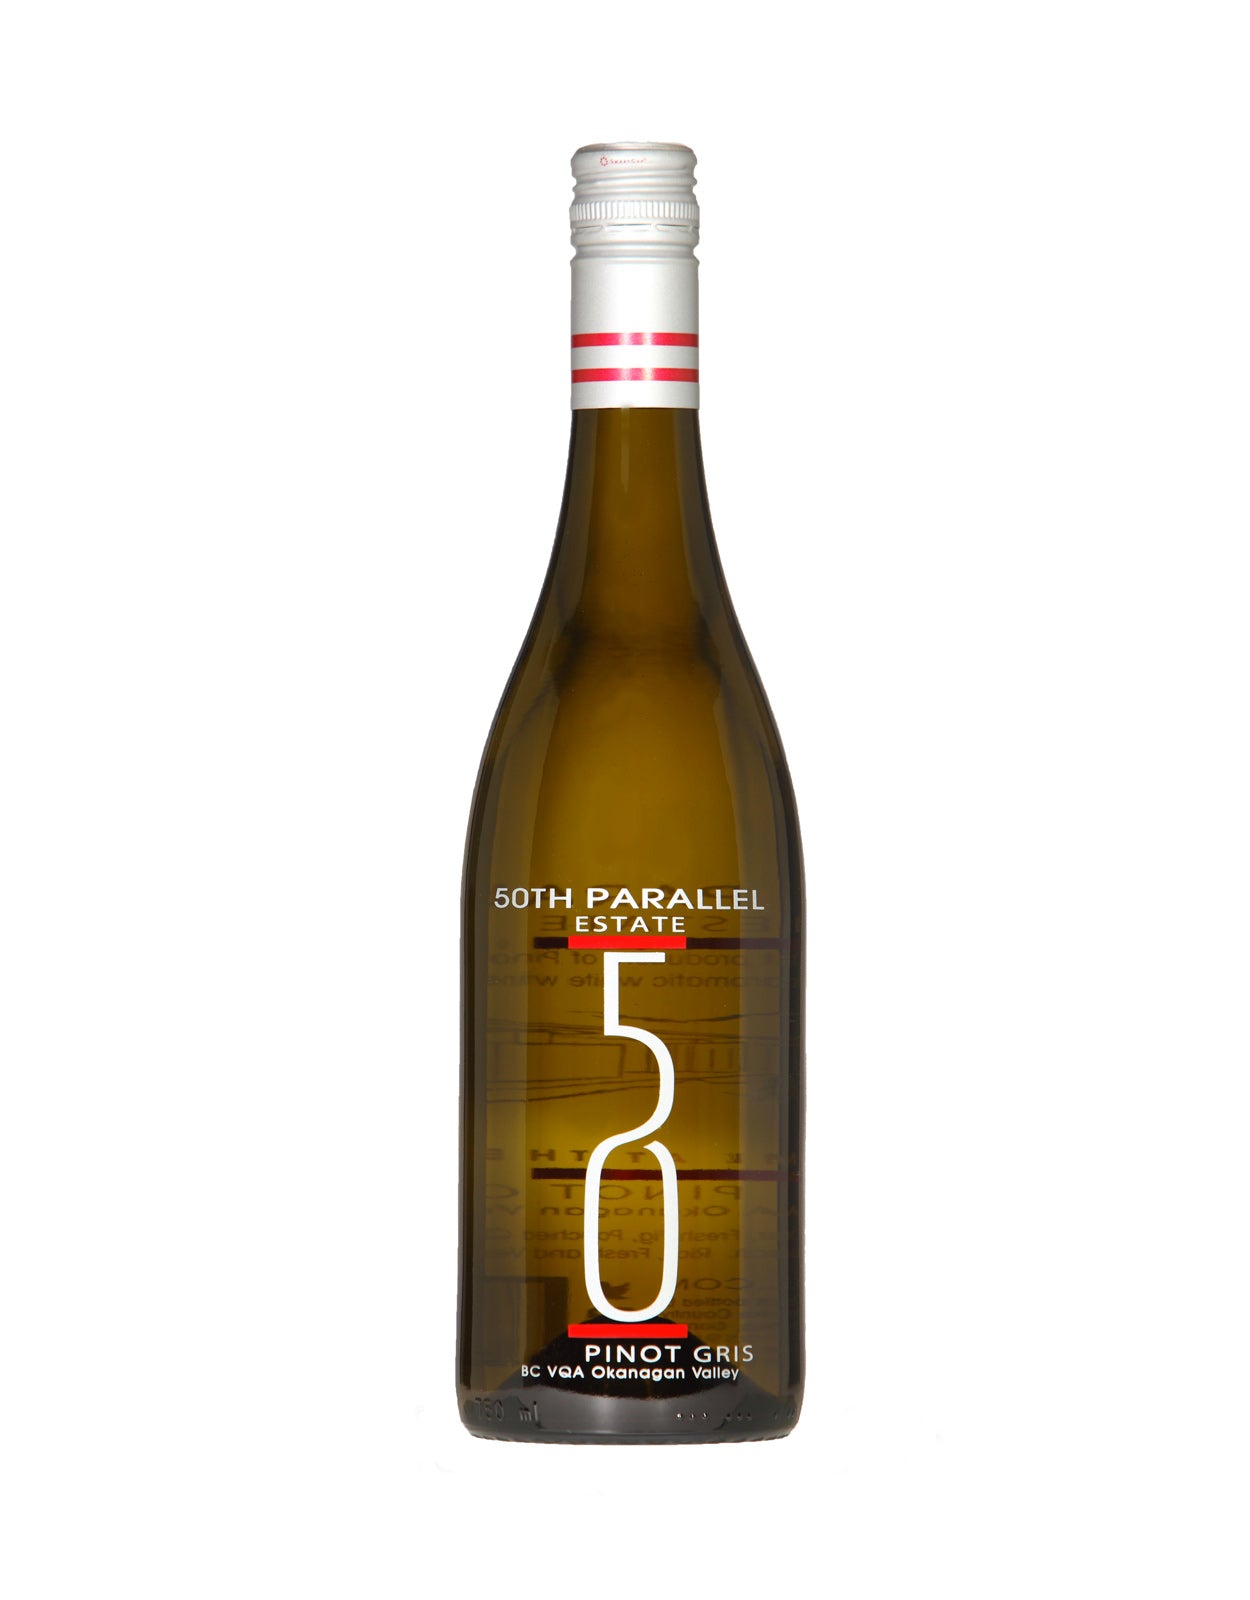 50th Parallel Pinot Gris 2022